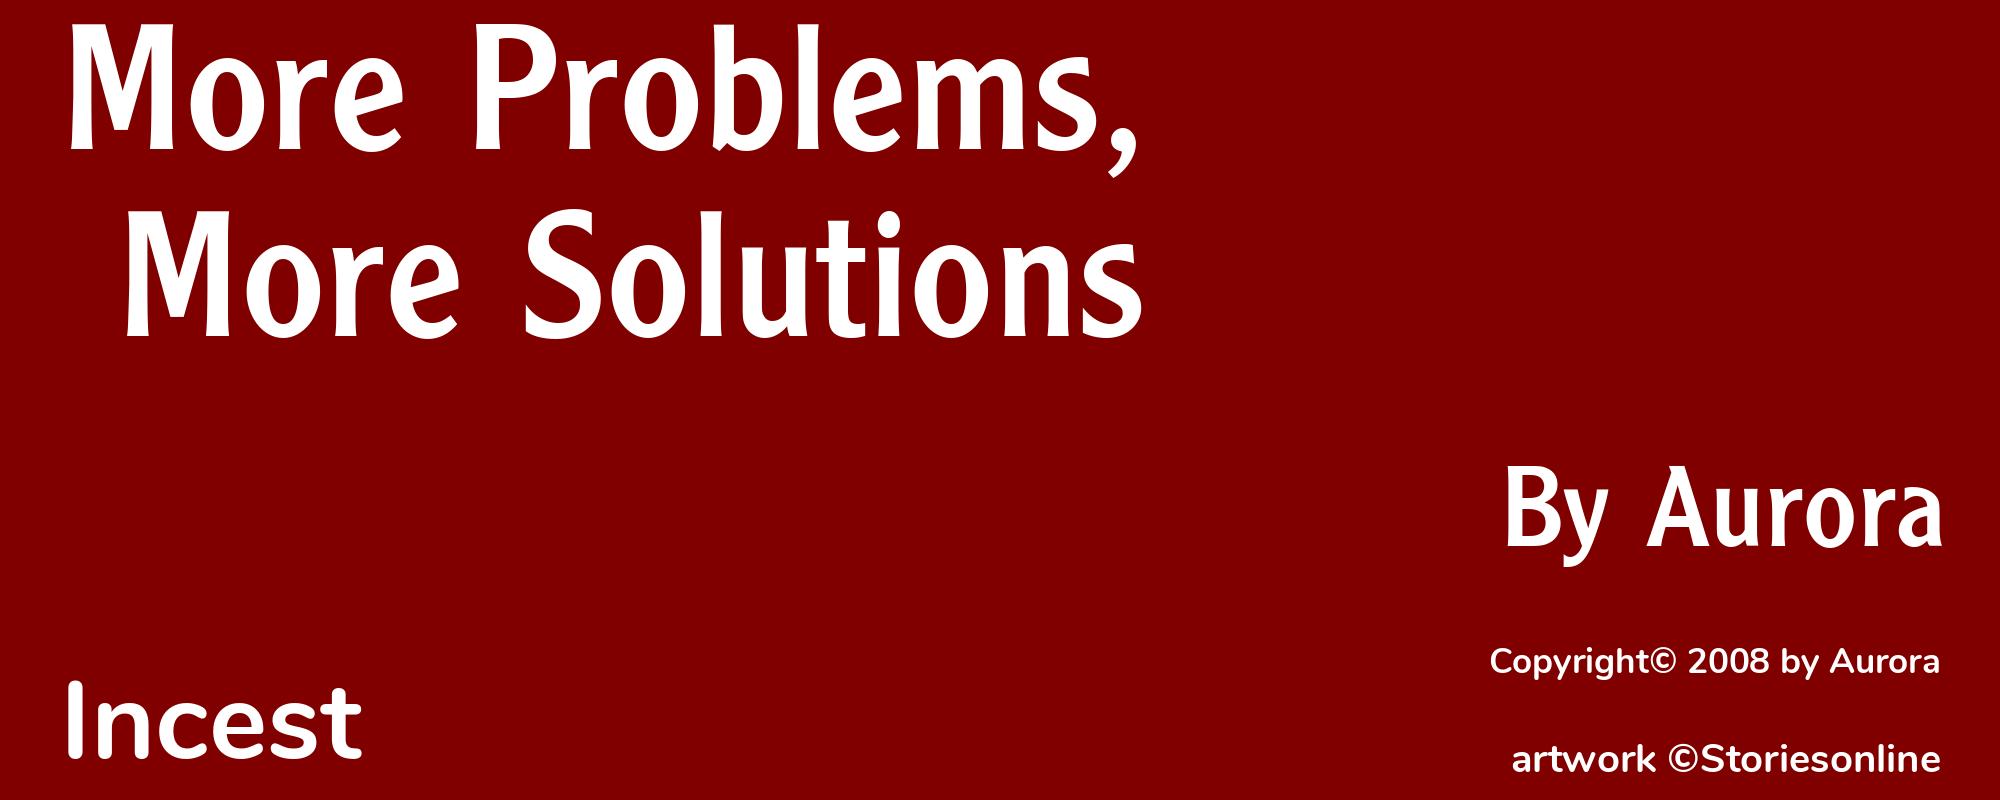 More Problems, More Solutions - Cover